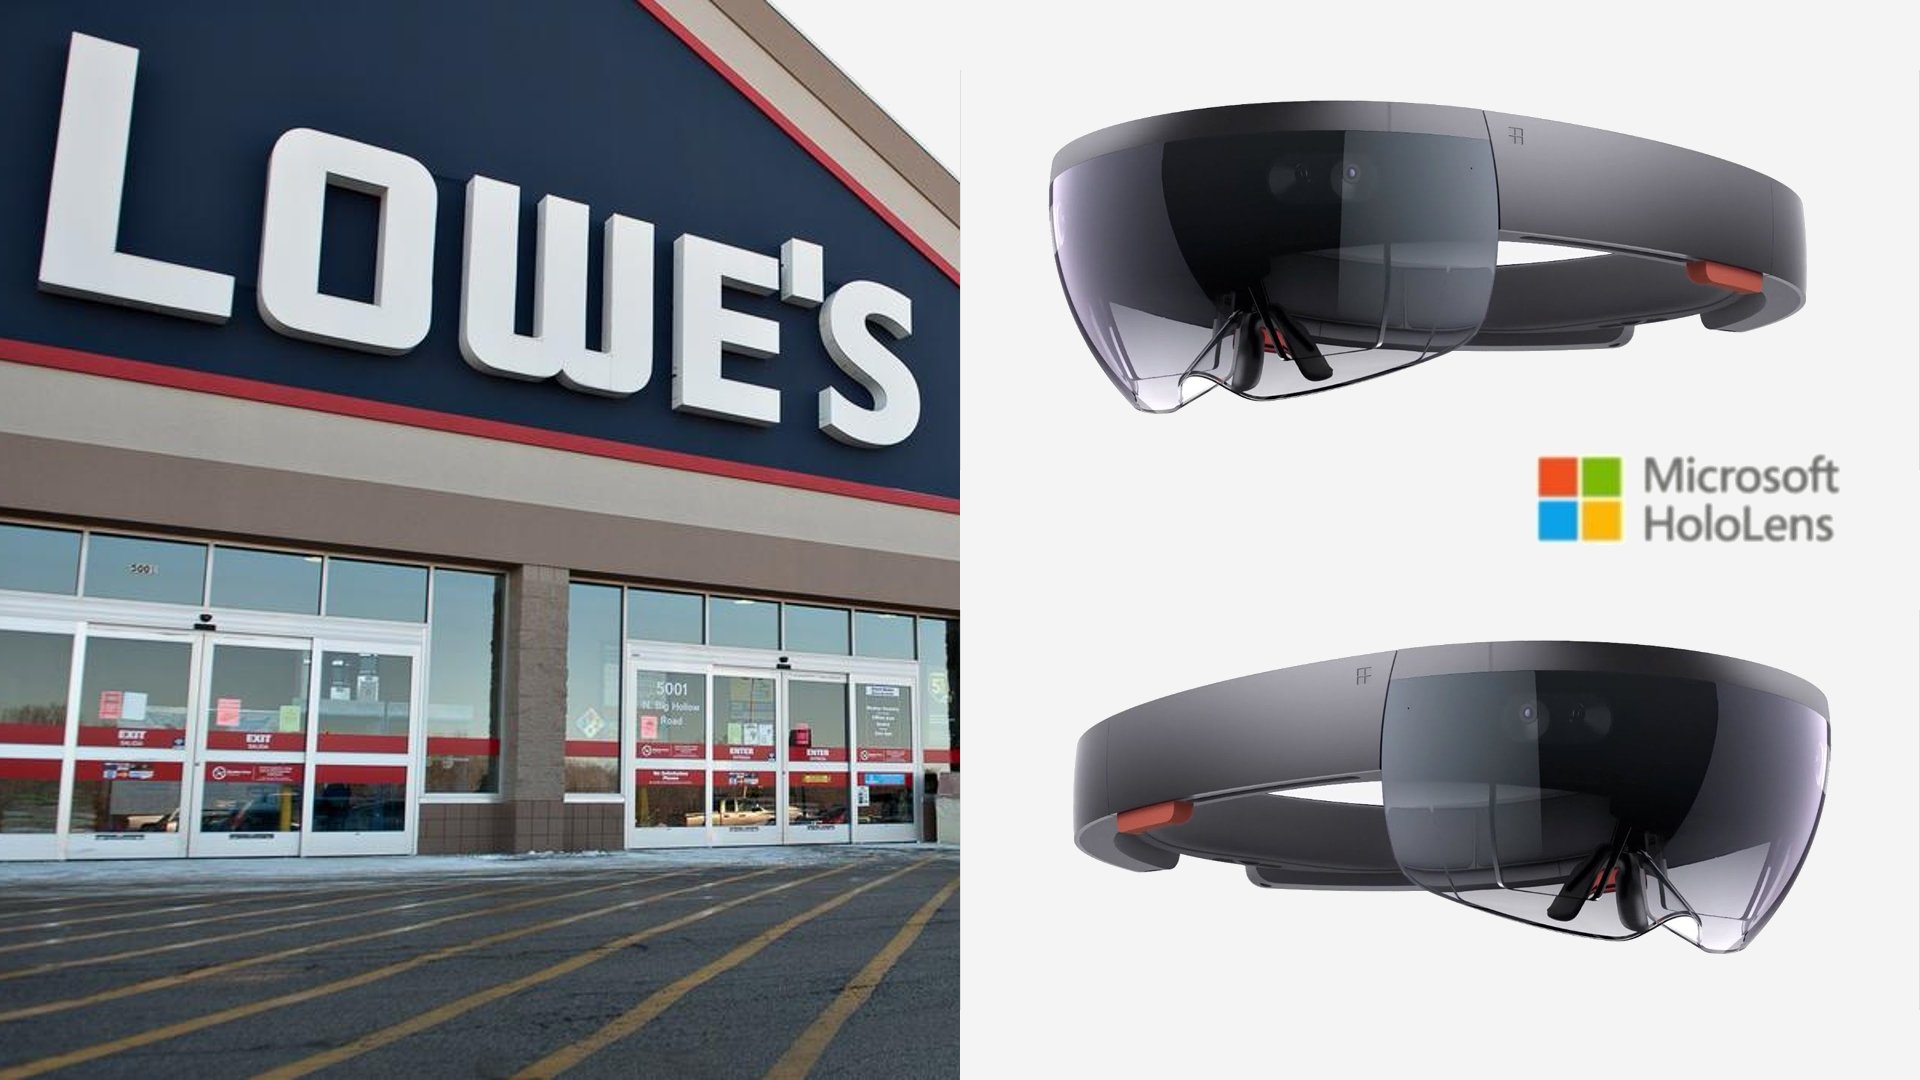 Lowe's Partners With Microsoft For HoloLens